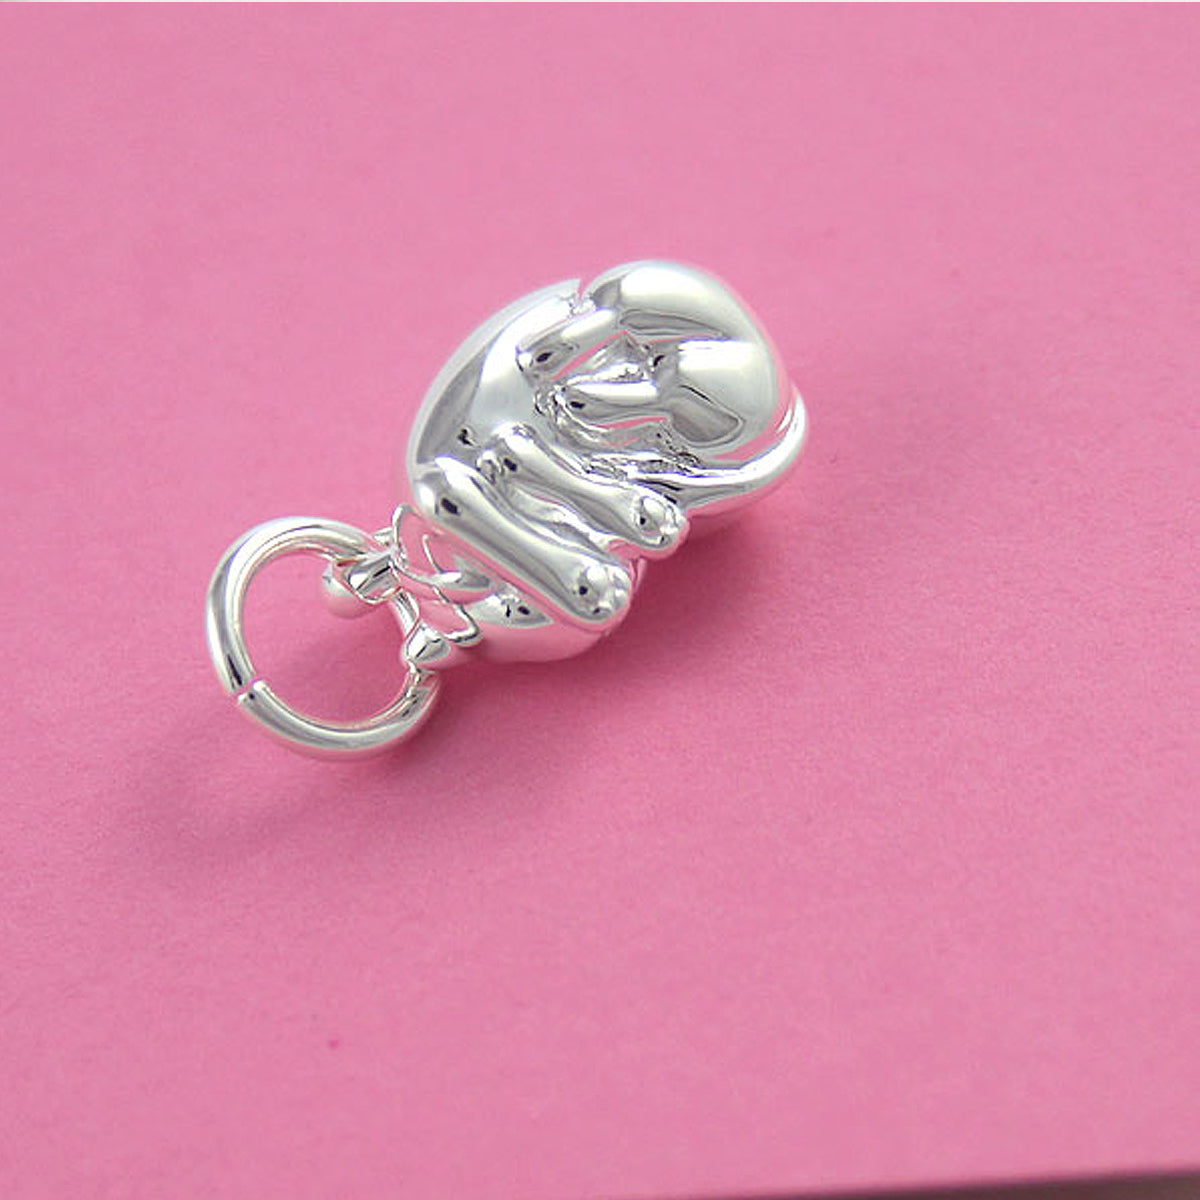 Cat Sterling Silver Charm for bracelet or necklace from Scarlett Jewellery